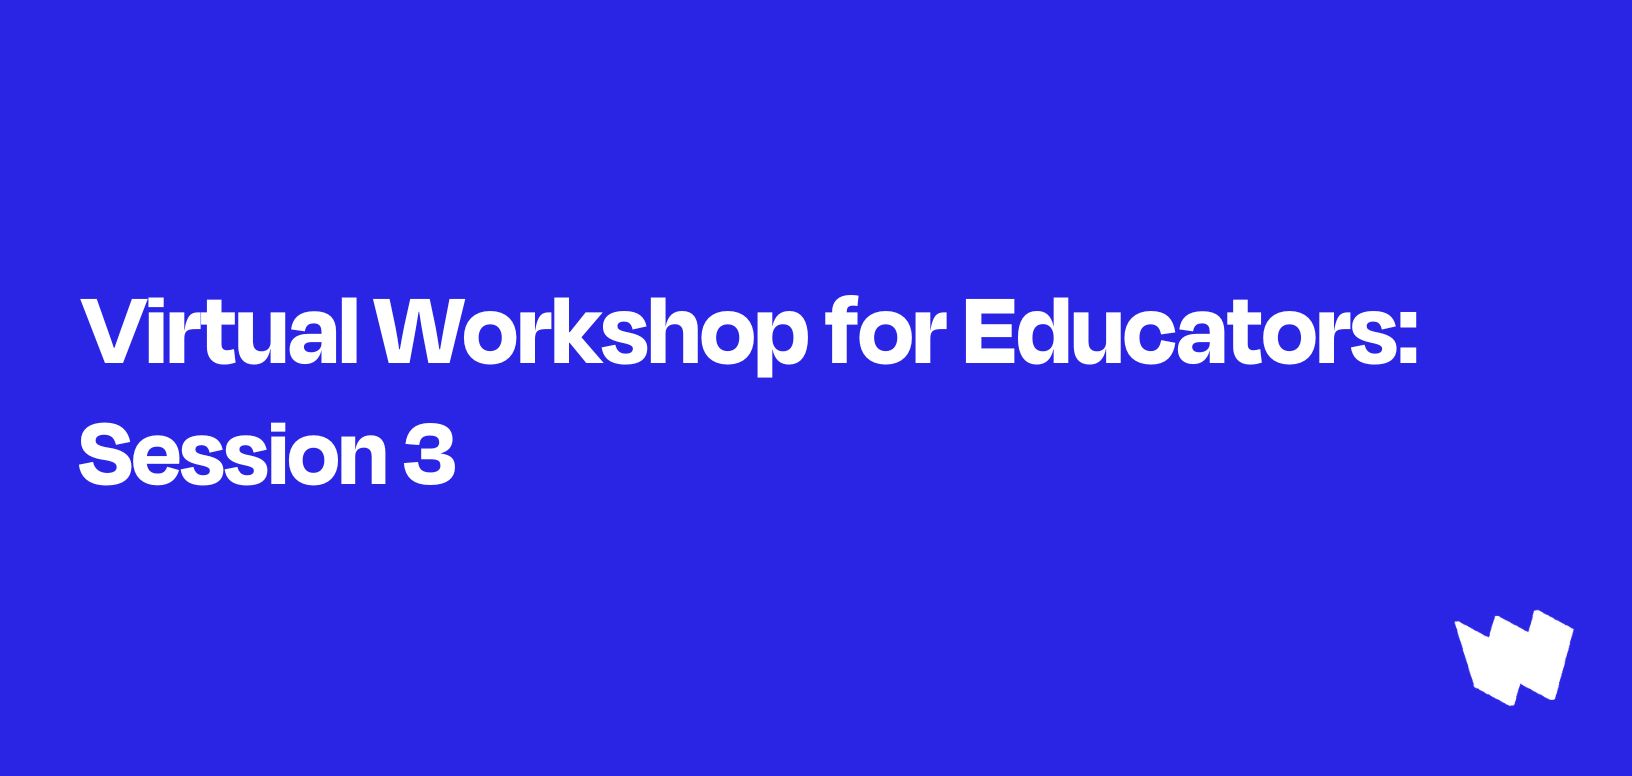 White text on blue background says "Virtual Workshop for Educators Session 3." Small "W" logo mark on bottom right hand corner.